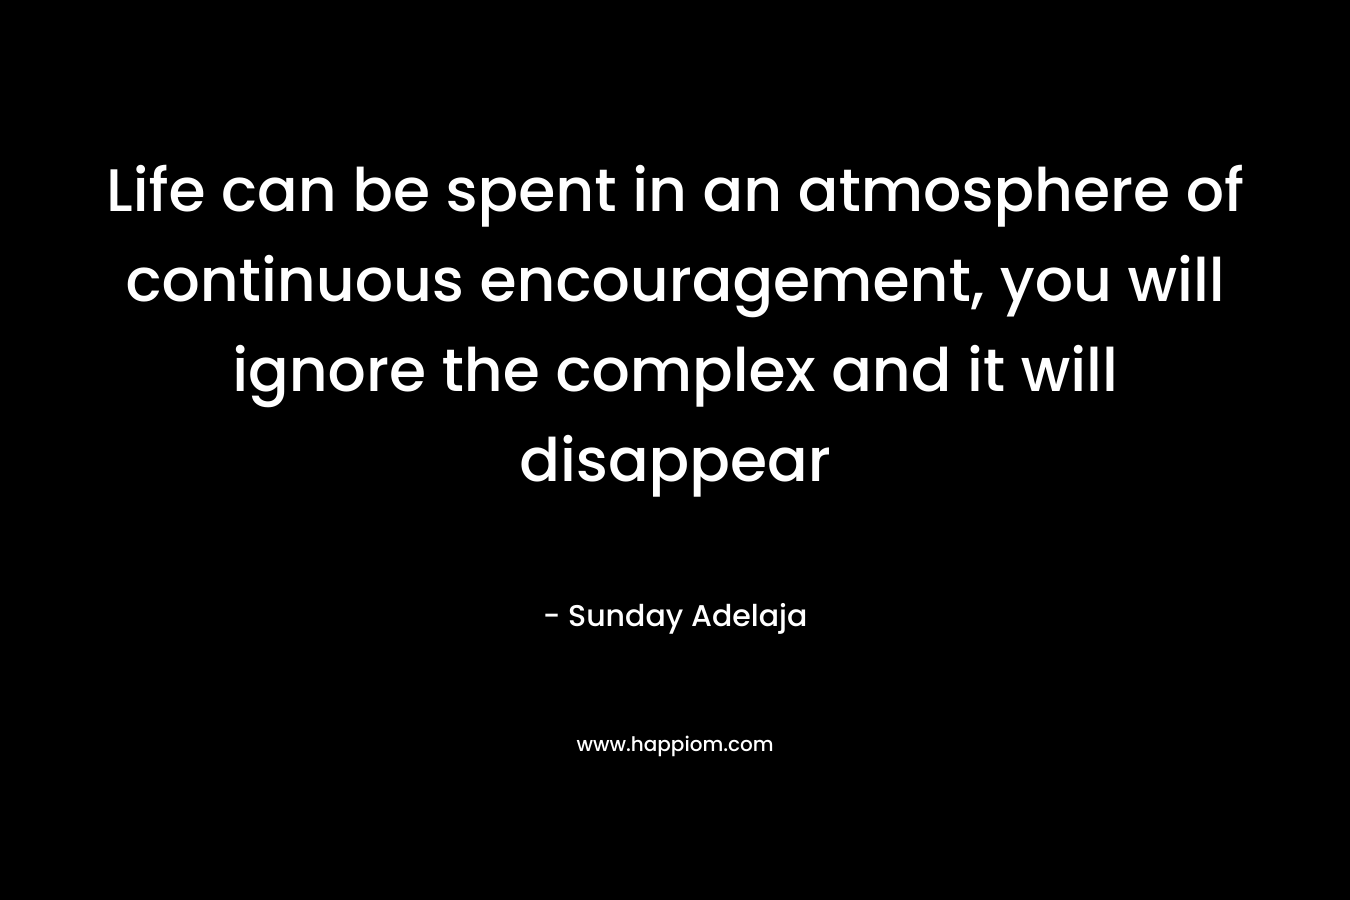 Life can be spent in an atmosphere of continuous encouragement, you will ignore the complex and it will disappear